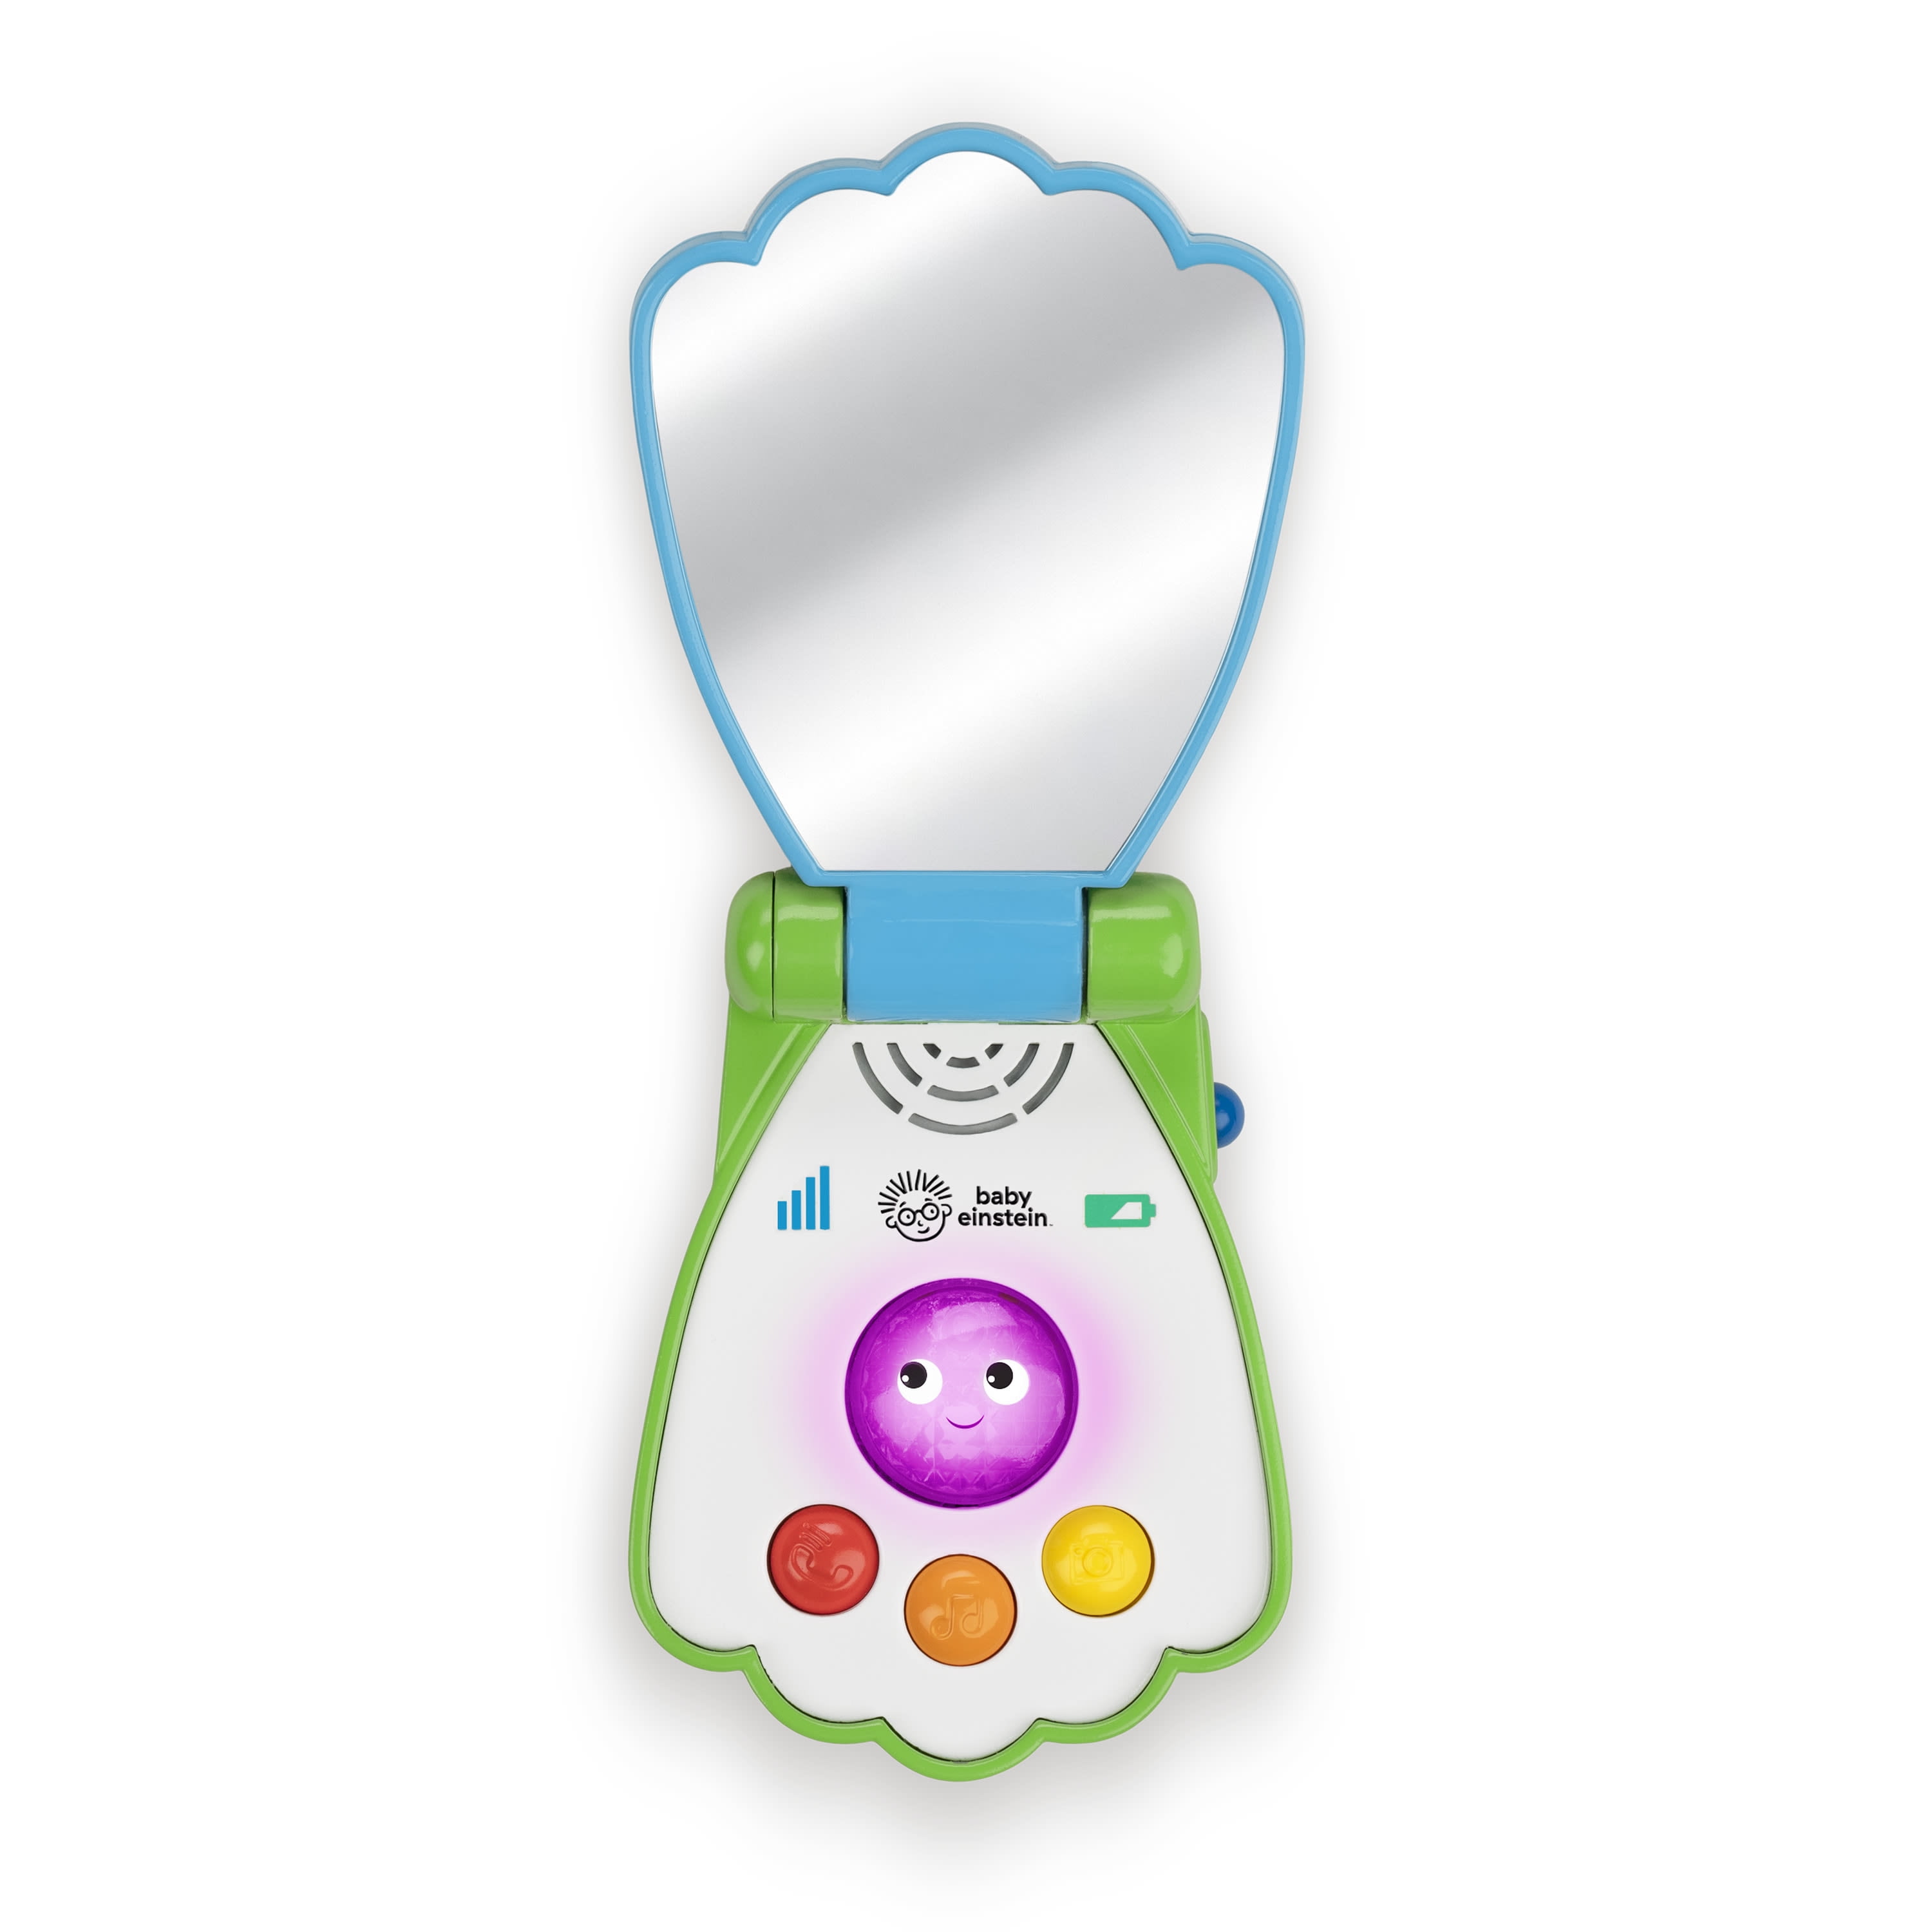 Ocean Explorers Shell Phone Musical Toy Telephone Ages 6 Months+